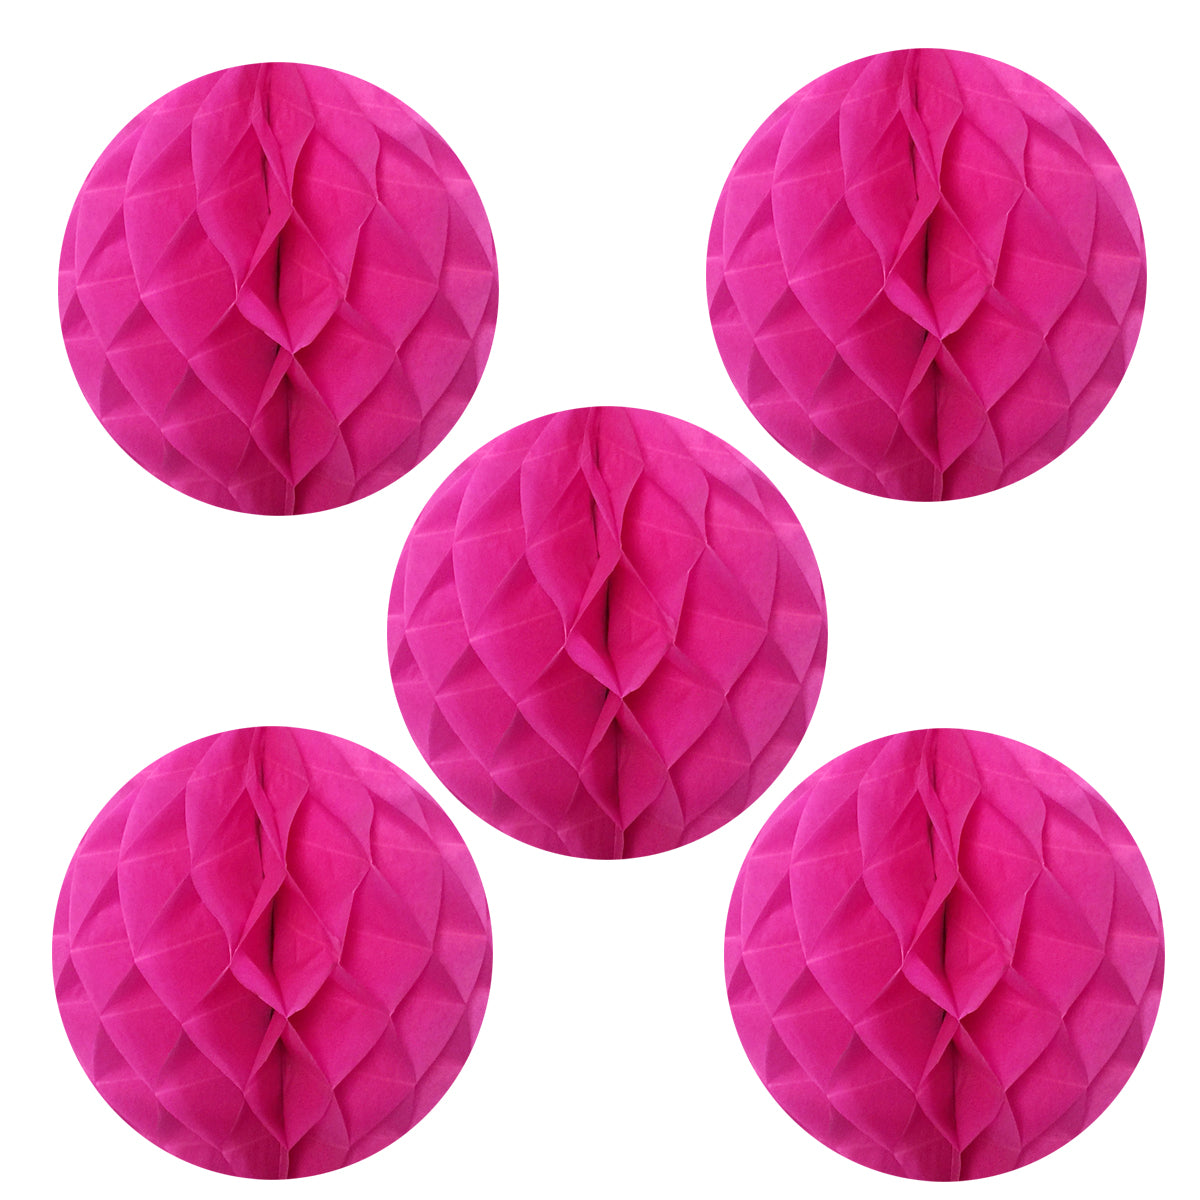 Wrapables 6" Set of 5 Tissue Honeycomb Ball Party Decorations